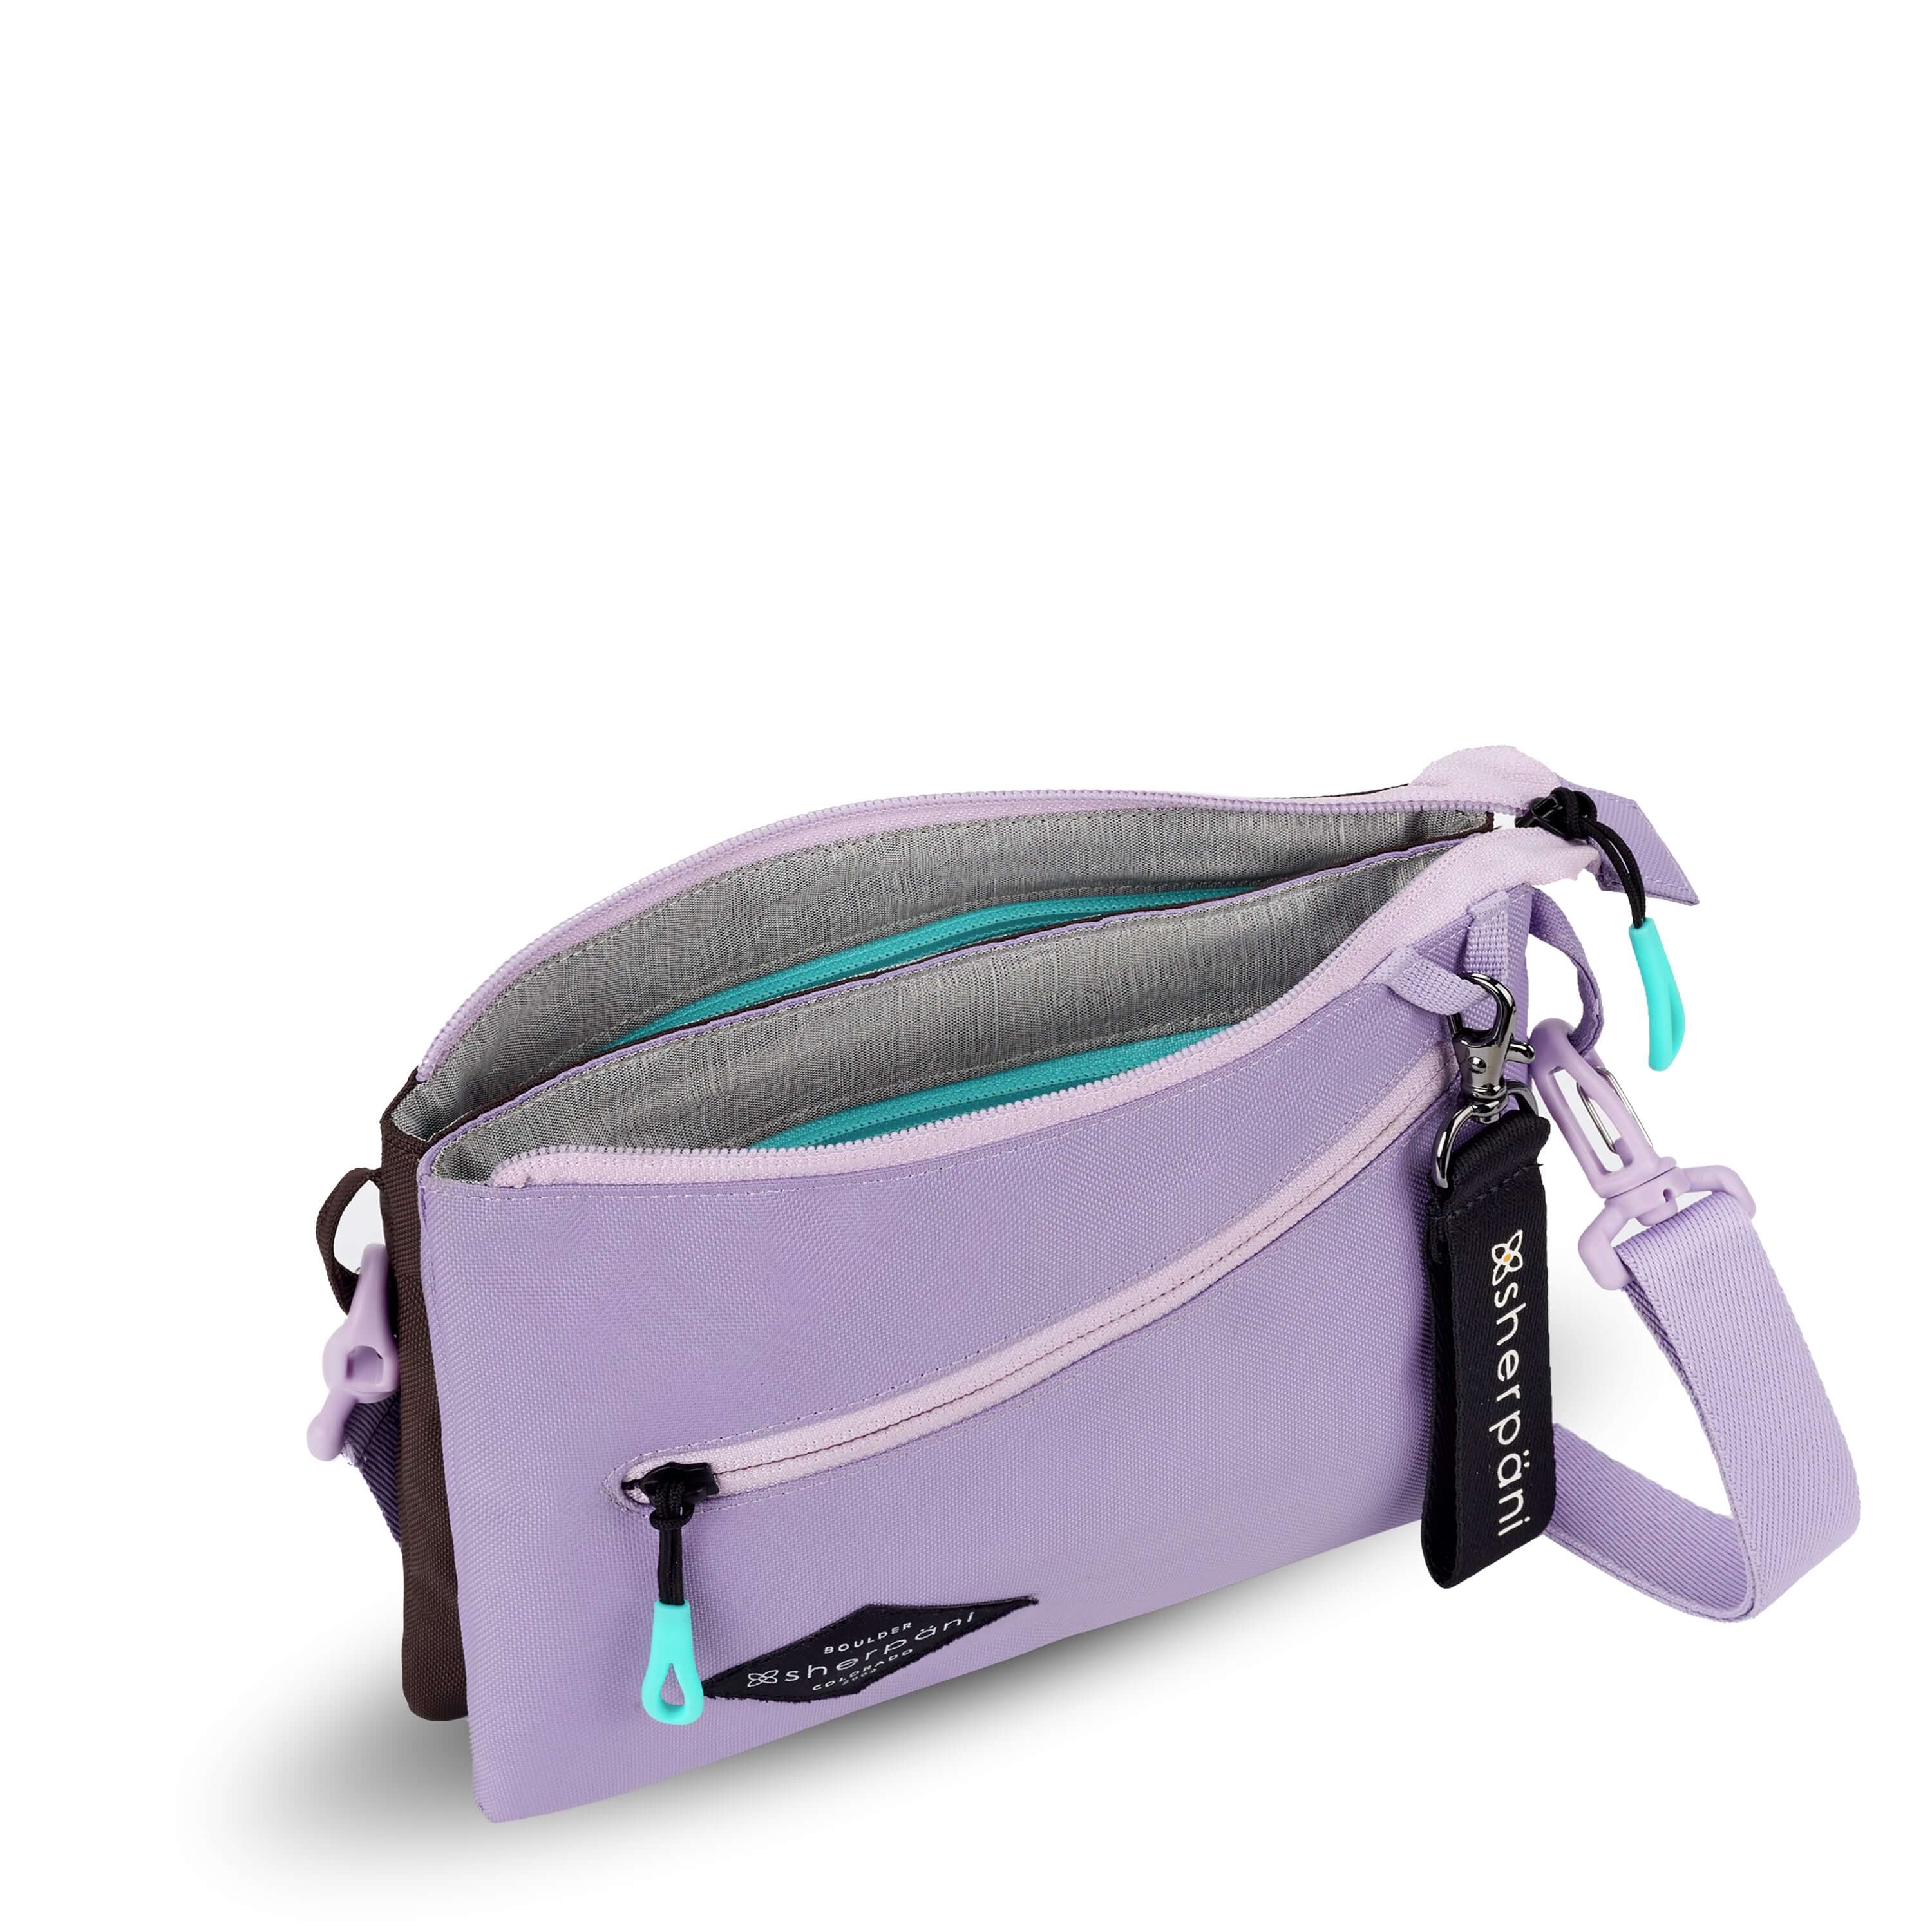 Top view of Sherpani crossbody, the Zoom in Lavender. The main zipper compartment is open to reveal an internal divider that separates the bag into dual compartments. The inside of the bag is light gray with zipper pockets accented in aqua.